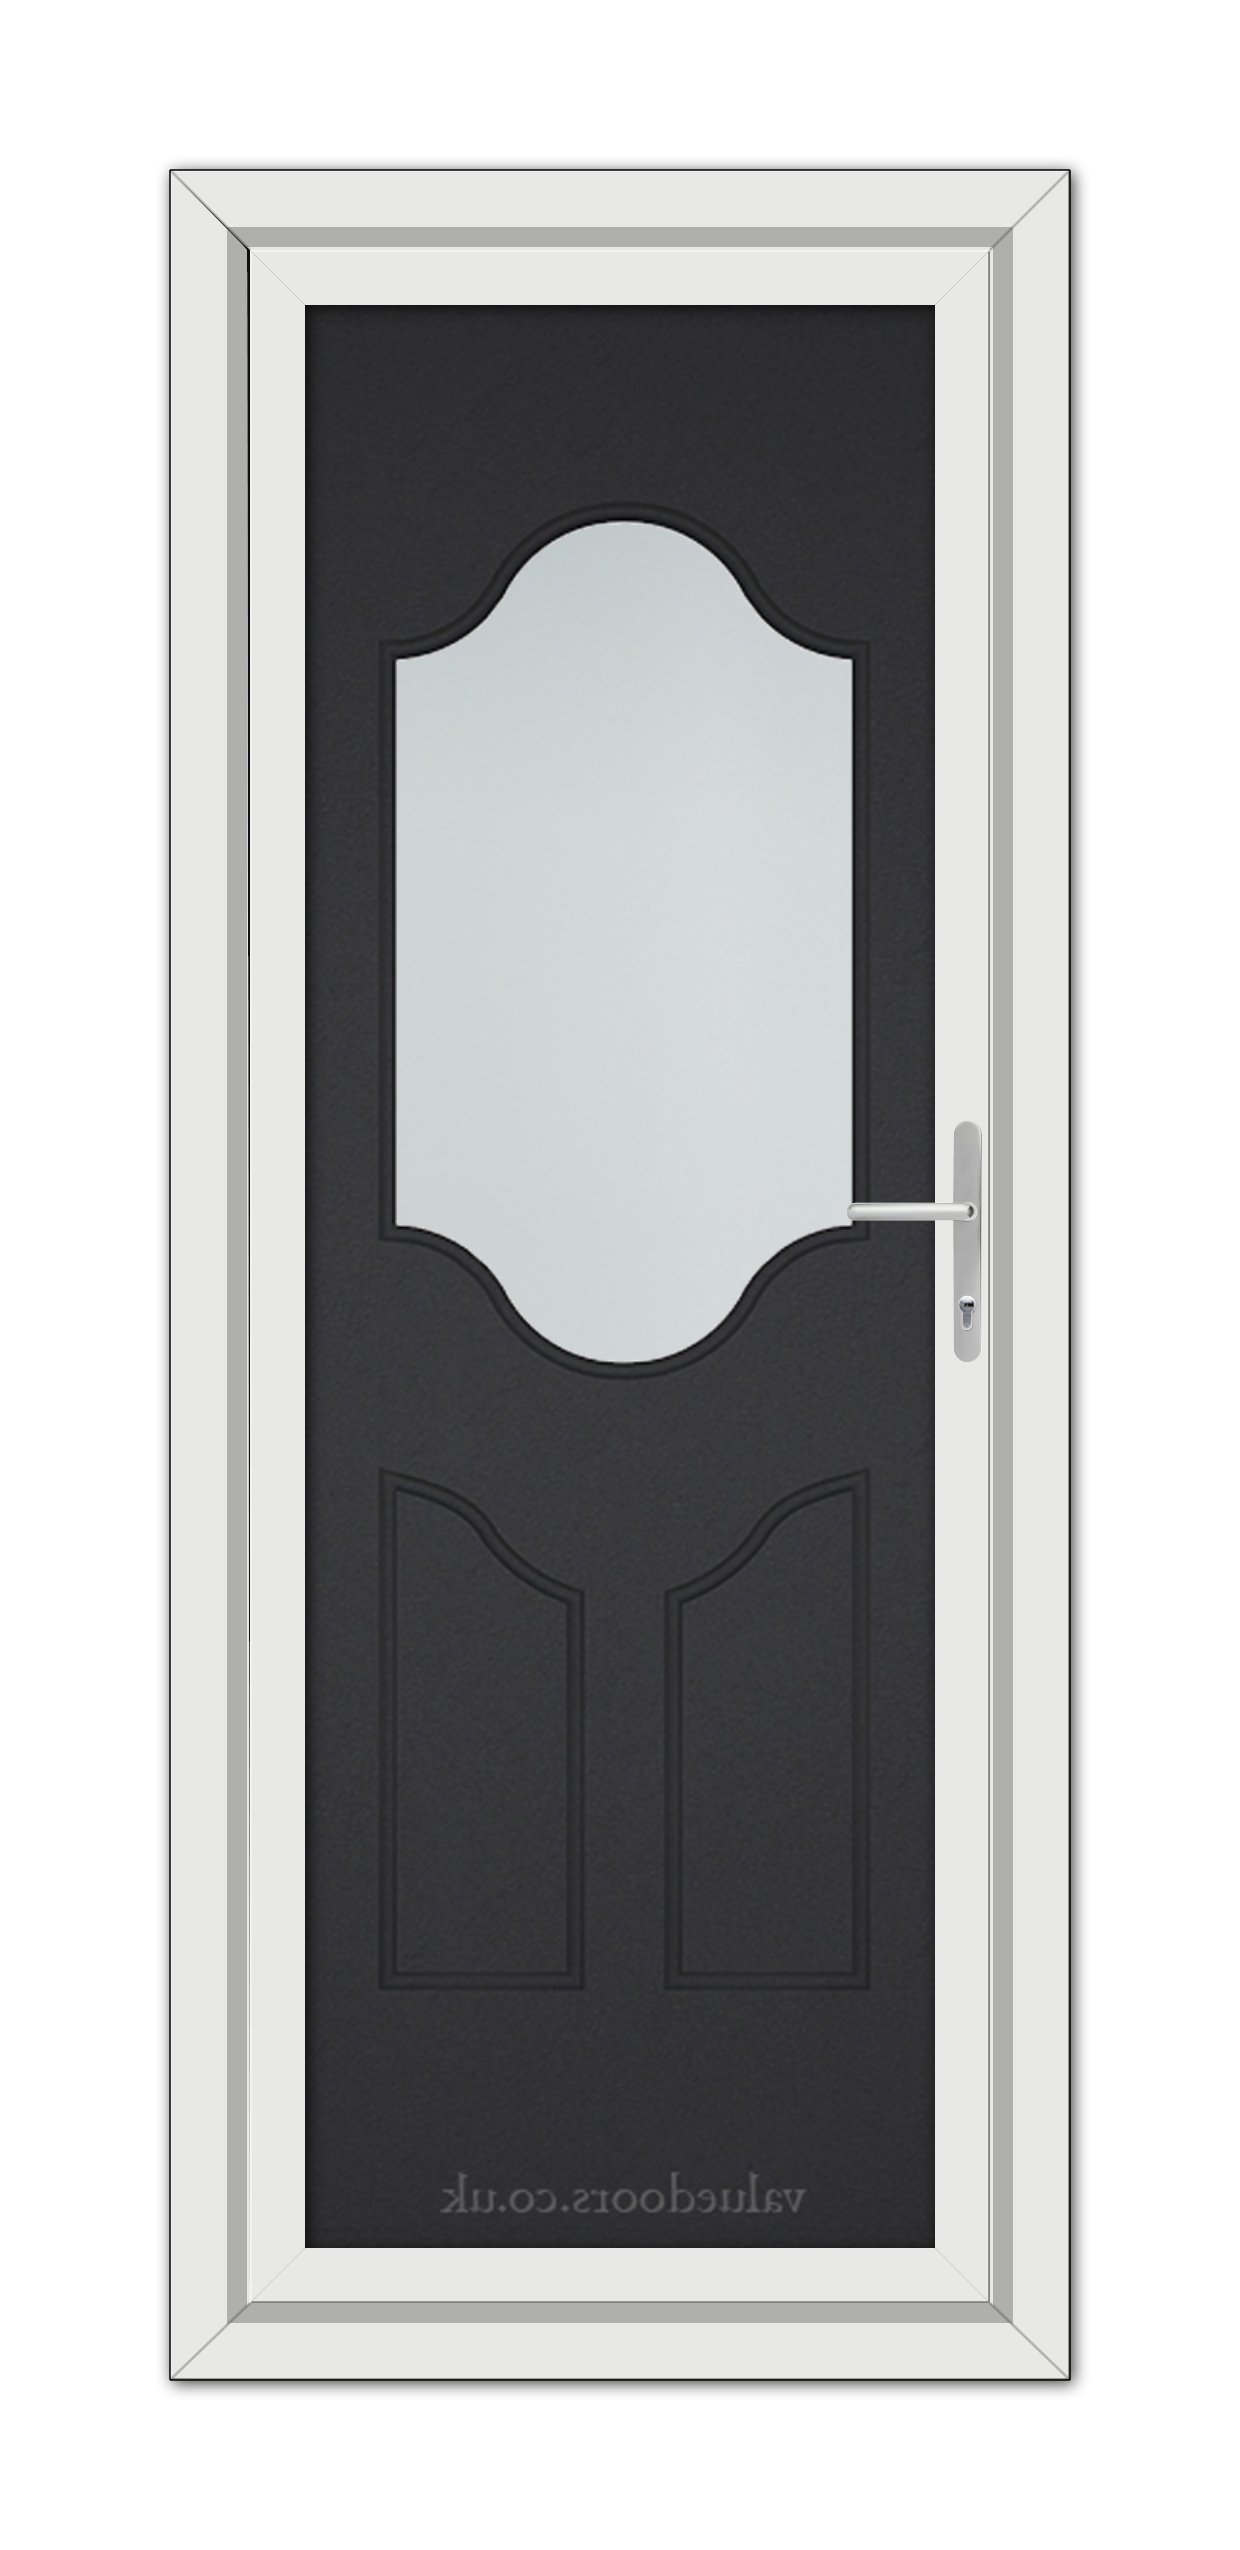 A tall Black Brown Althorpe One uPVC Door with a rectangular frame, featuring an oval-shaped window at the top and two panels below. The door is equipped with a metallic handle on the right side.